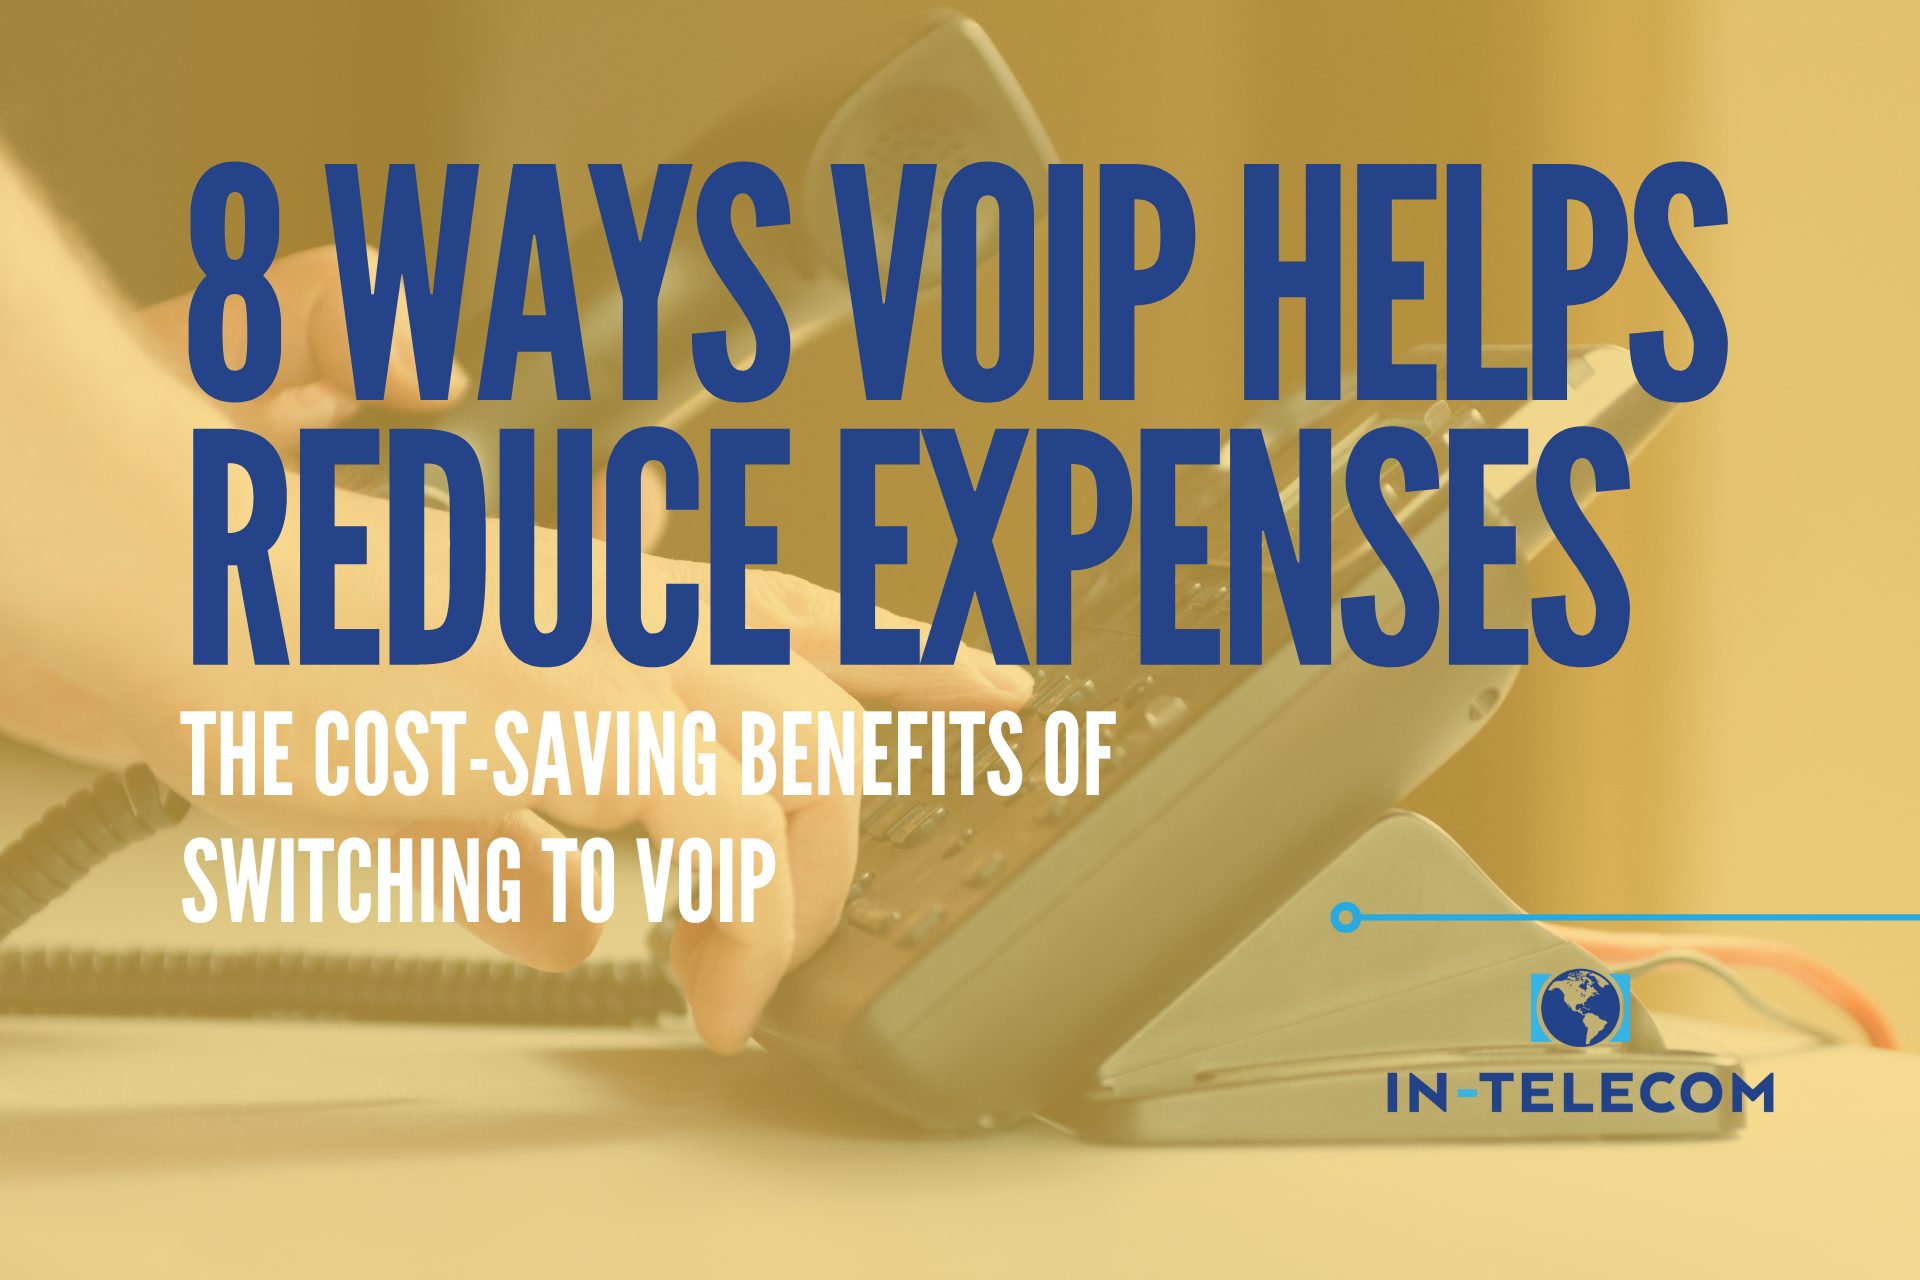 image of a phone with text about reducing costs with voip phone service